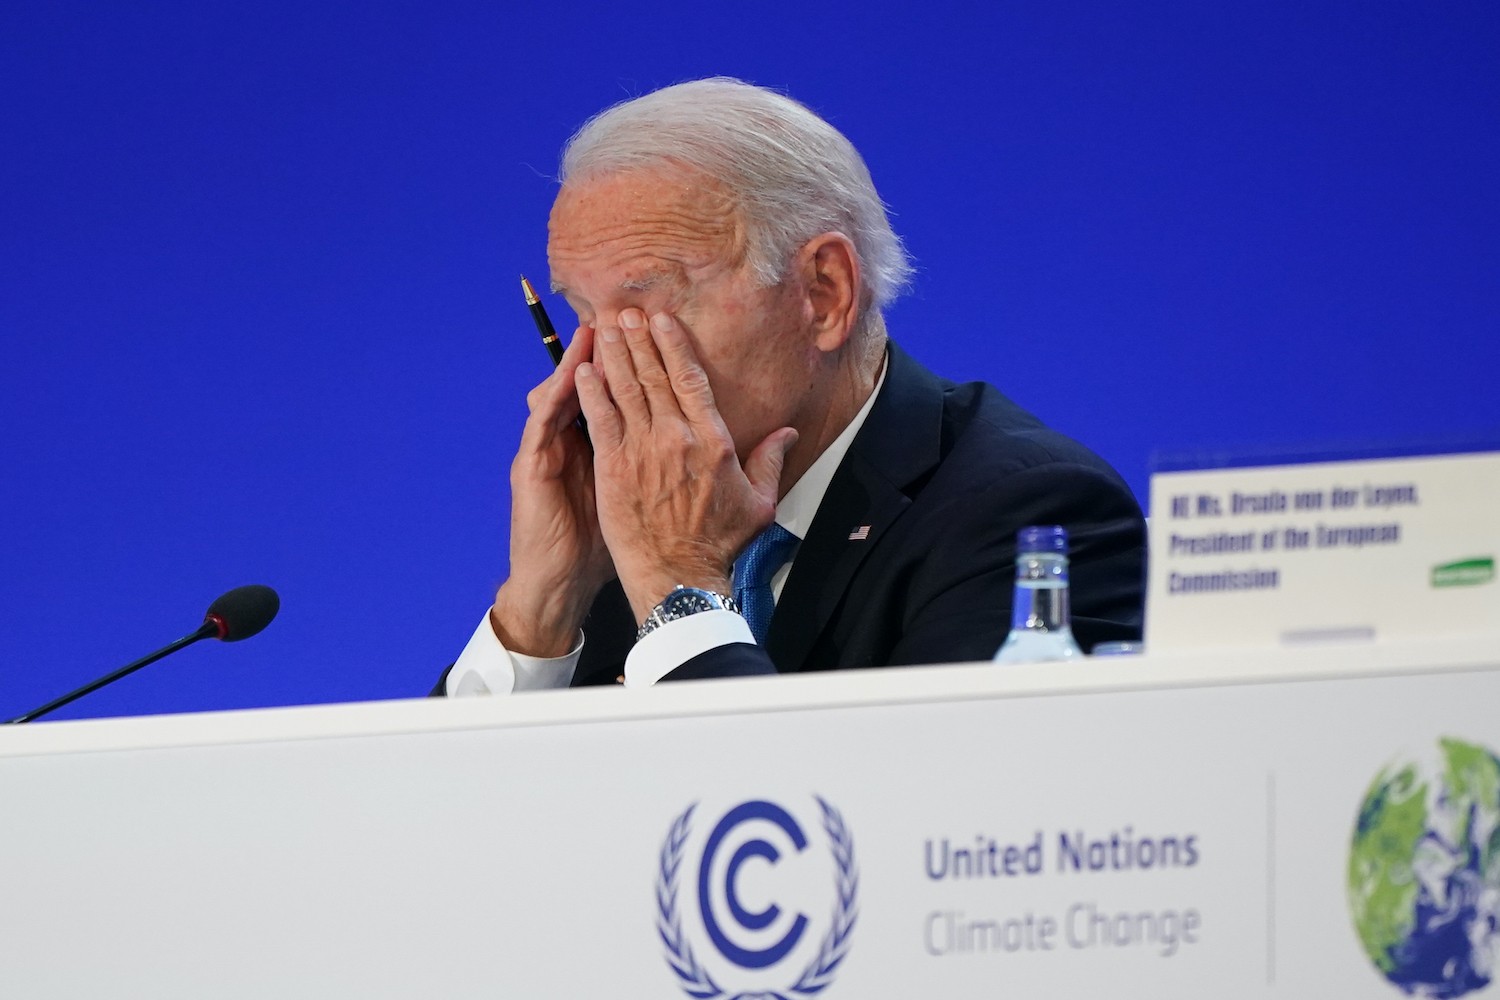 U.S. President Joe Biden listens to the speakers during the World Leaders' Summit "Accelerating Clean Technology Innovation and Deployment" session on day three of COP26 on Nov. 2, in Glasgow, Scotland. IAN FORSYTH/GETTY IMAGES